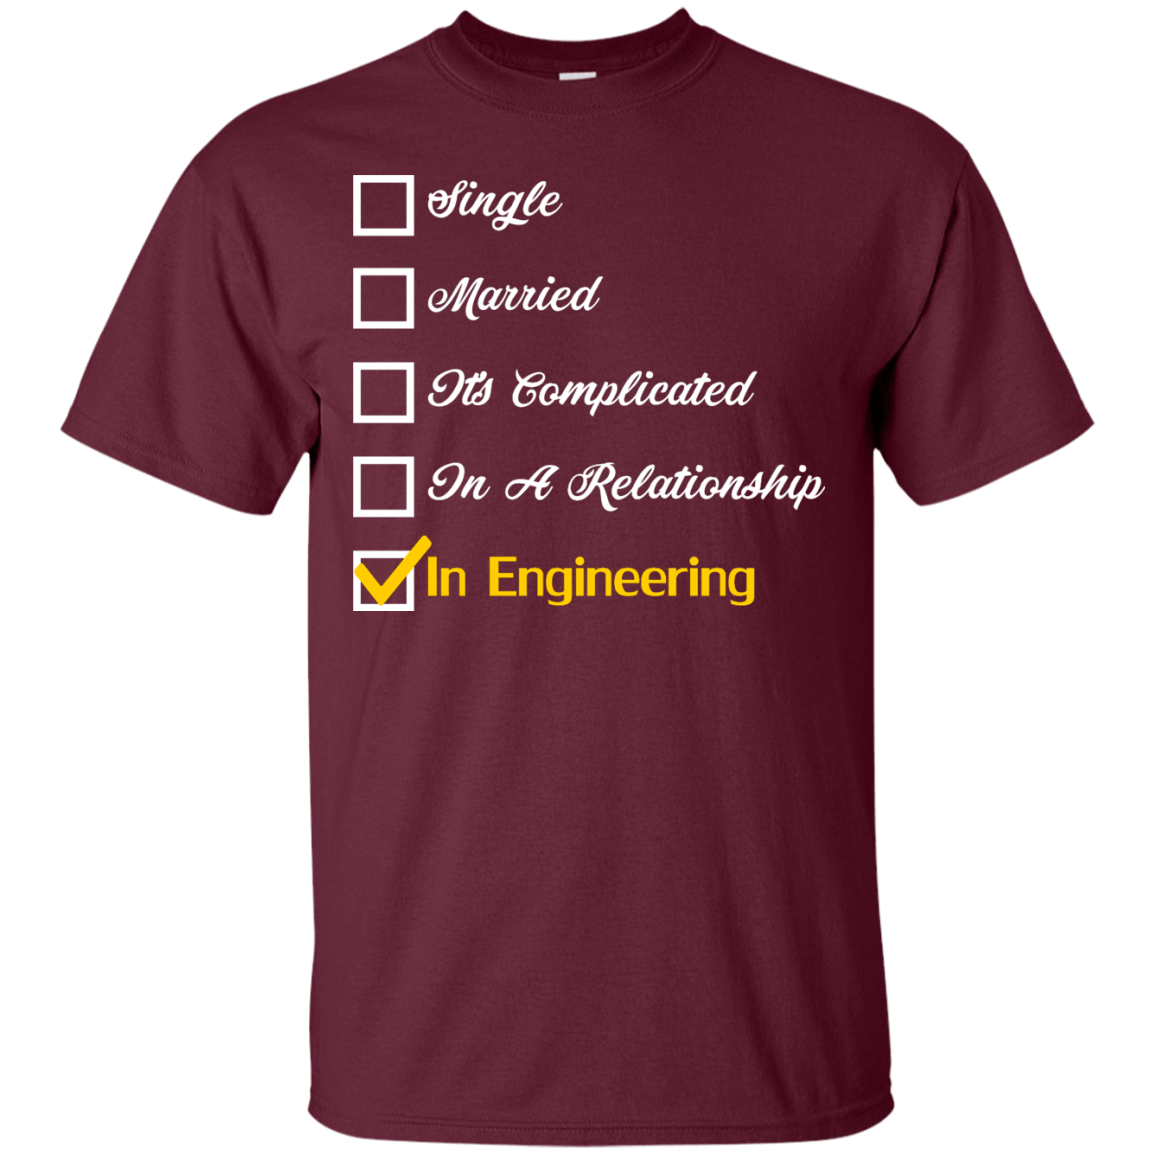 Engineering Relationship Status - Engineering Outfitters